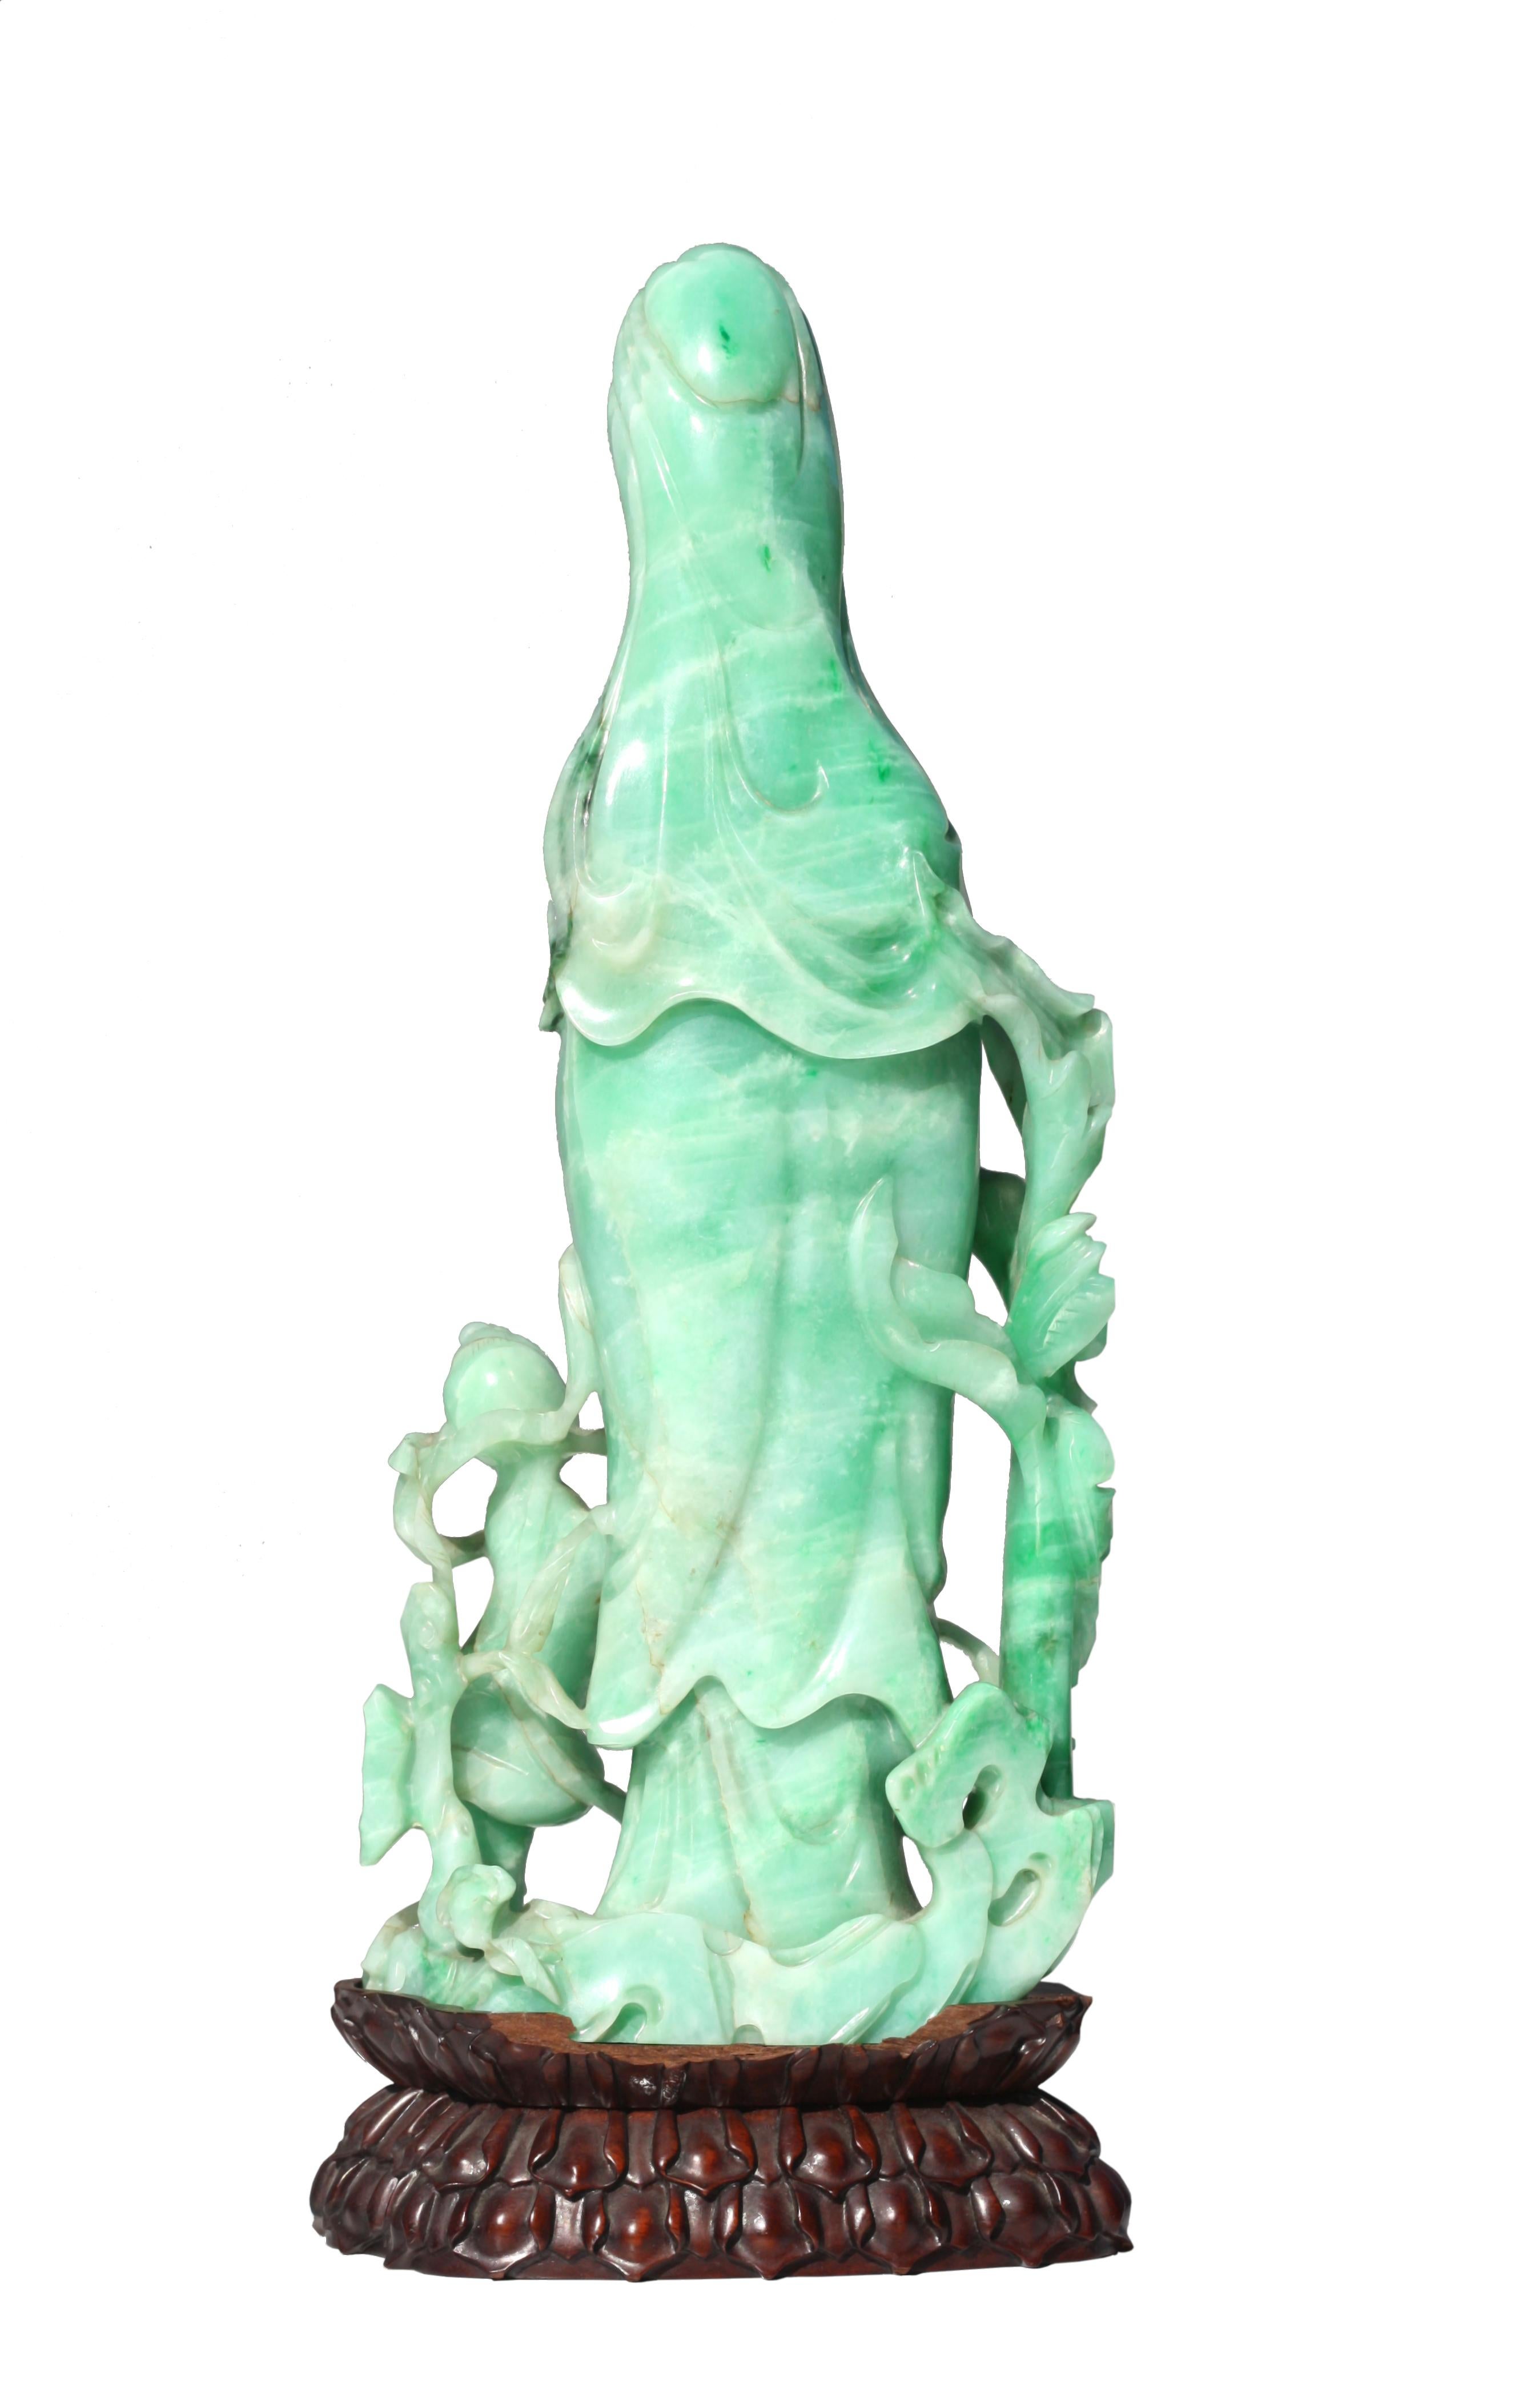 
Fine Chinese Emerald Green Jadeite Quanyin
The standing deity clothed in elegant robes, her hair coiffed in a knot and draped with a veil, her elongated face with a serene gaze, she holds a rod, by her side is a child, both standing amidst leafy